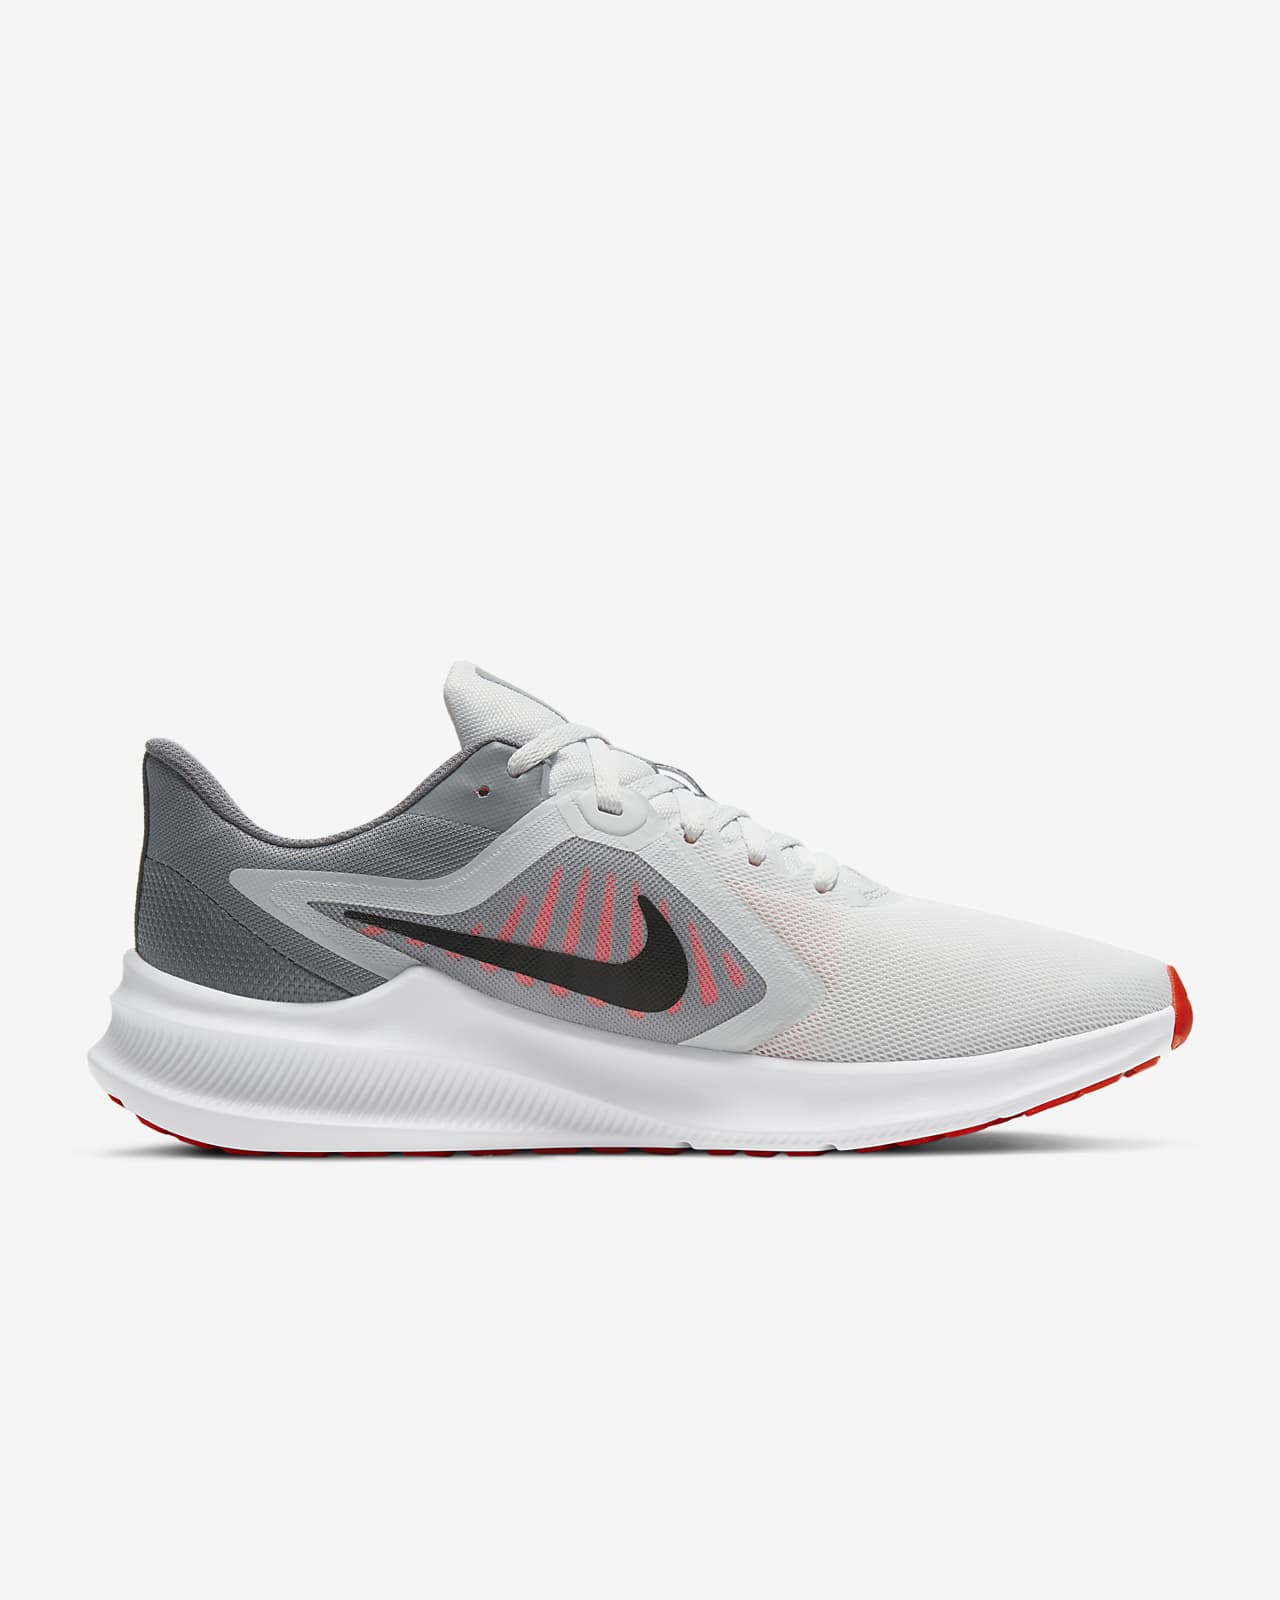 Bumper  NIKE Running Shoes at Just Rs 999 Flat 70 off  Free Shipping